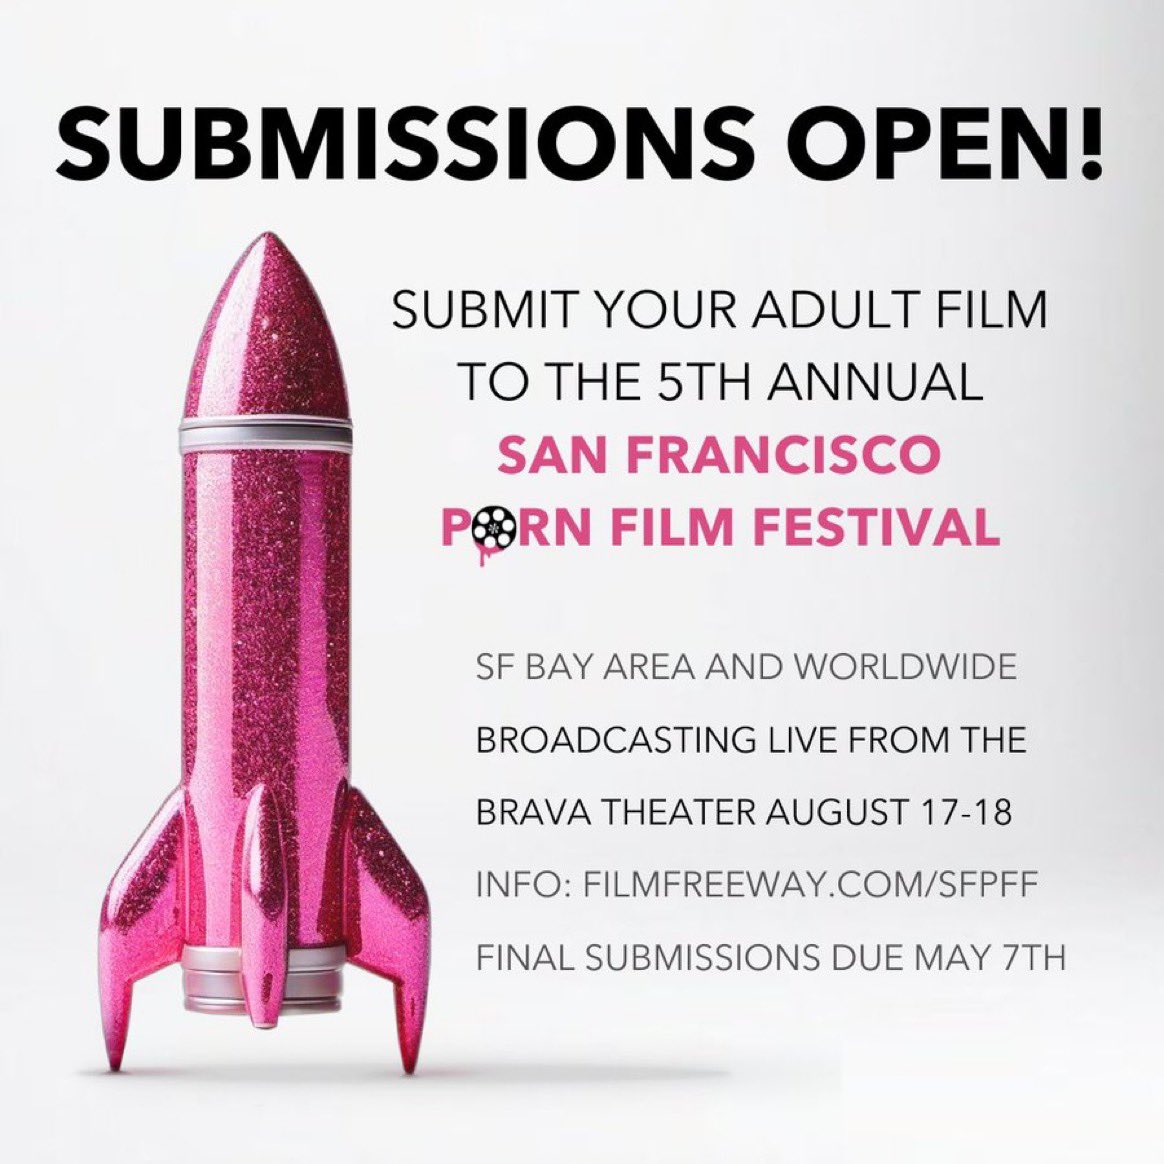 Submissions are open for the 5th annual San Francisco PornFilmFestival. Submit your adult film by the final deadline, May 7th. #SFPFF Followers use code SFPFF24 to waive the entry fee. 📽️ Submit: filmfreeway.com/sfpff